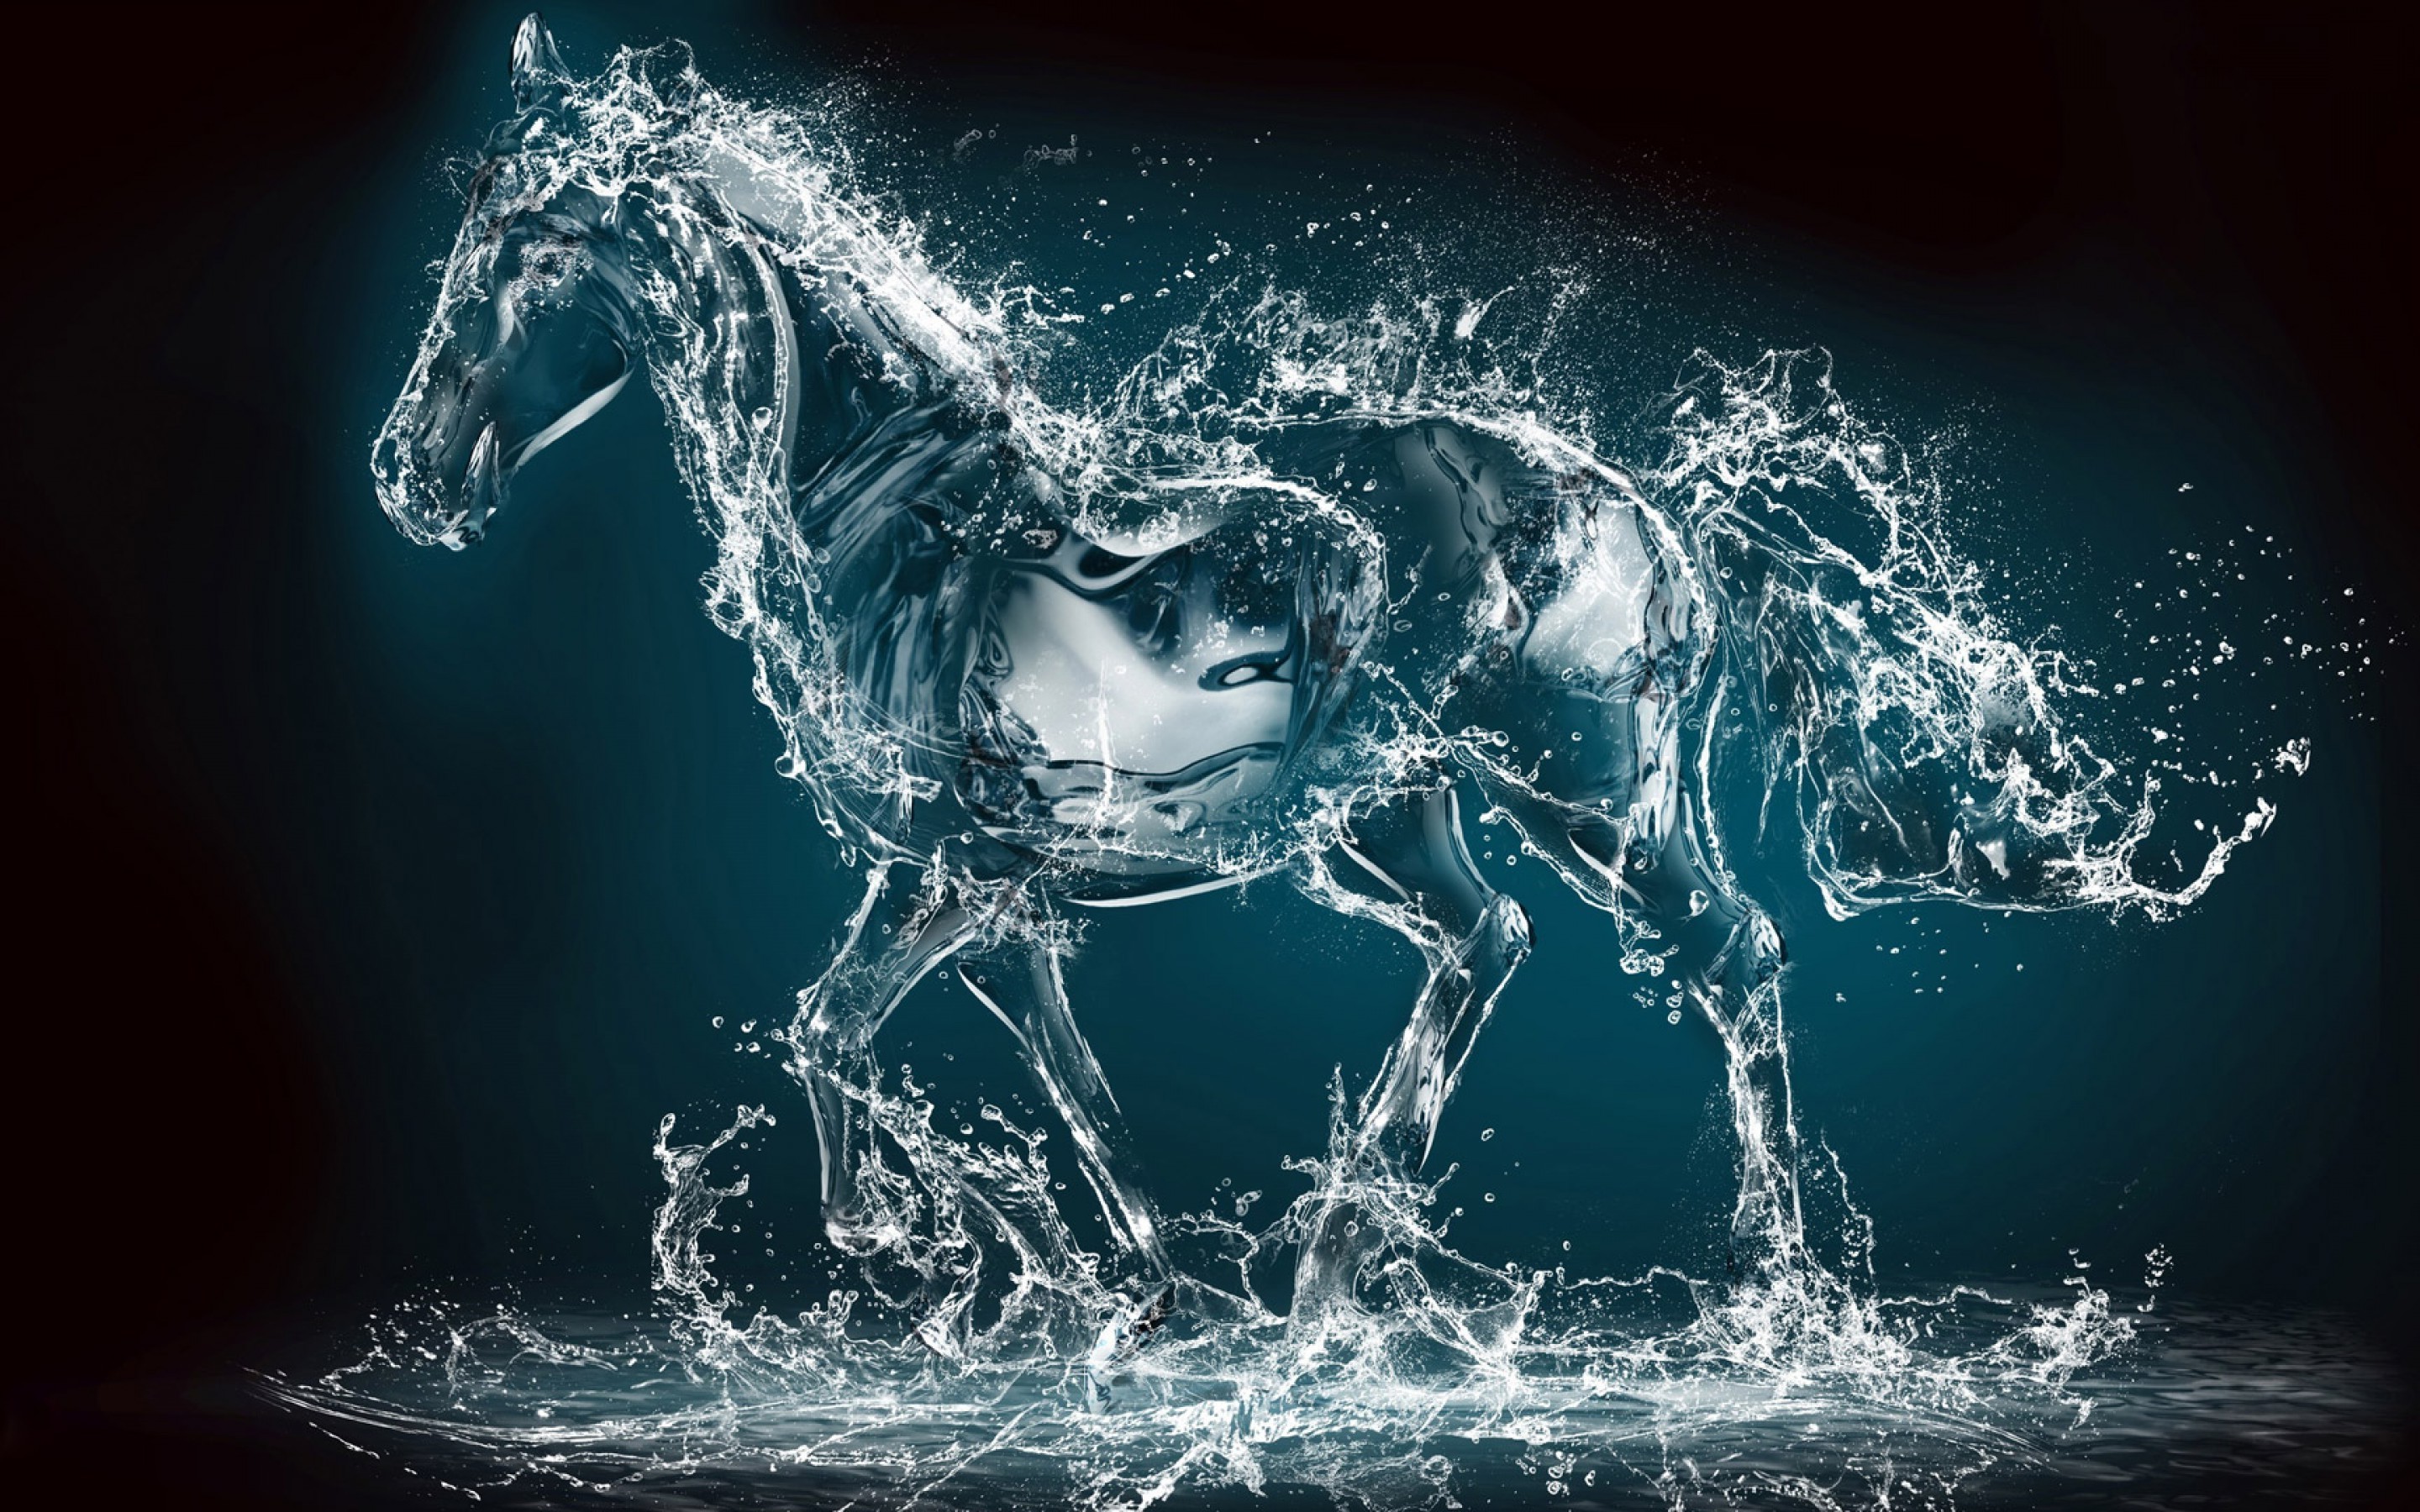 Wallpapers illustration water horse on the desktop